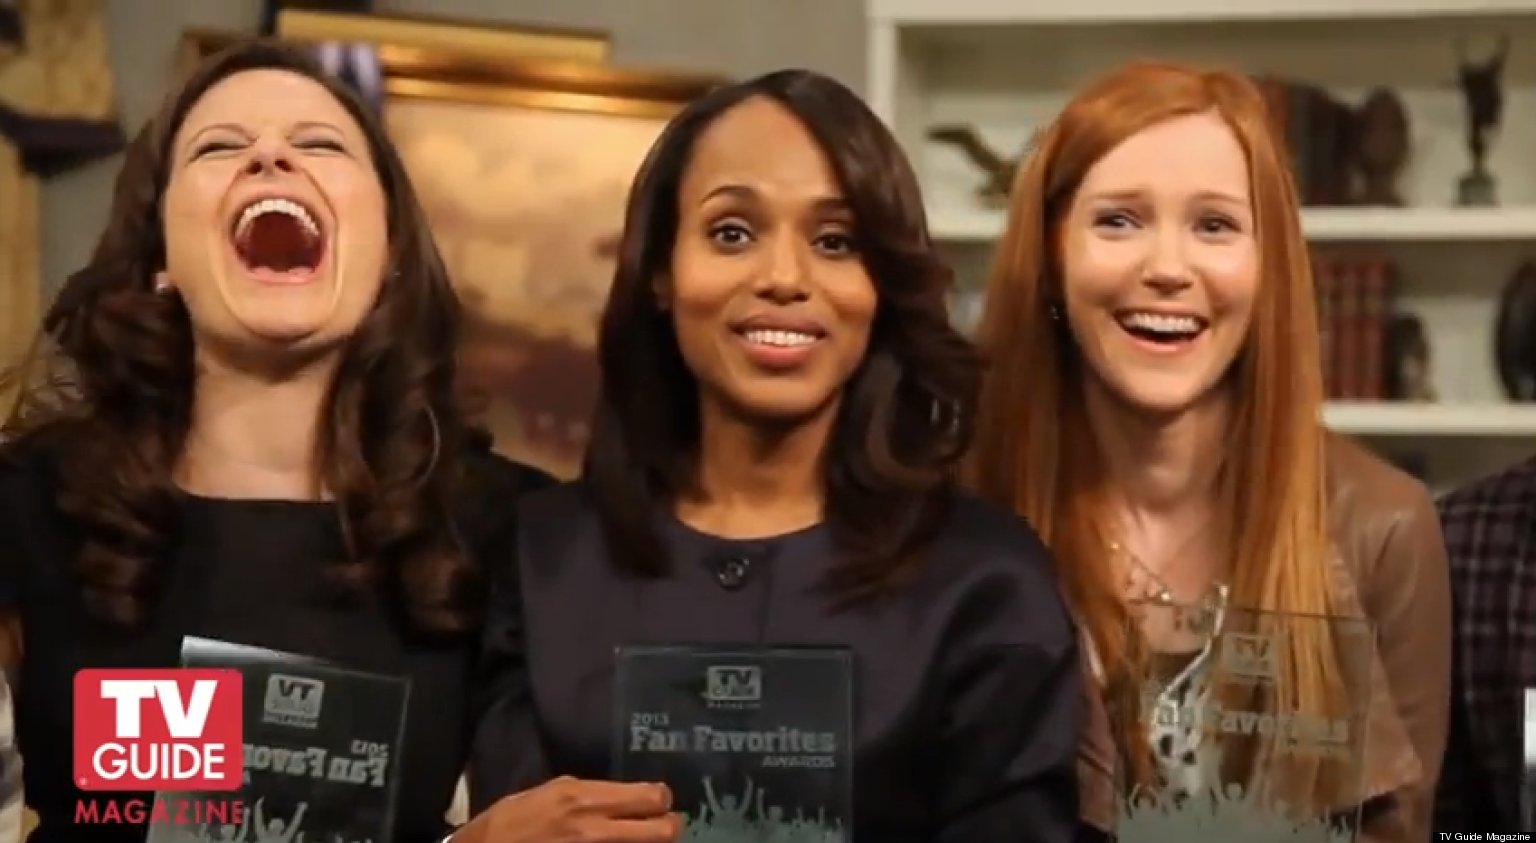 Scandal Cast Adorably And Excitedly Accepts Tv Guide Magazine Fan 0411